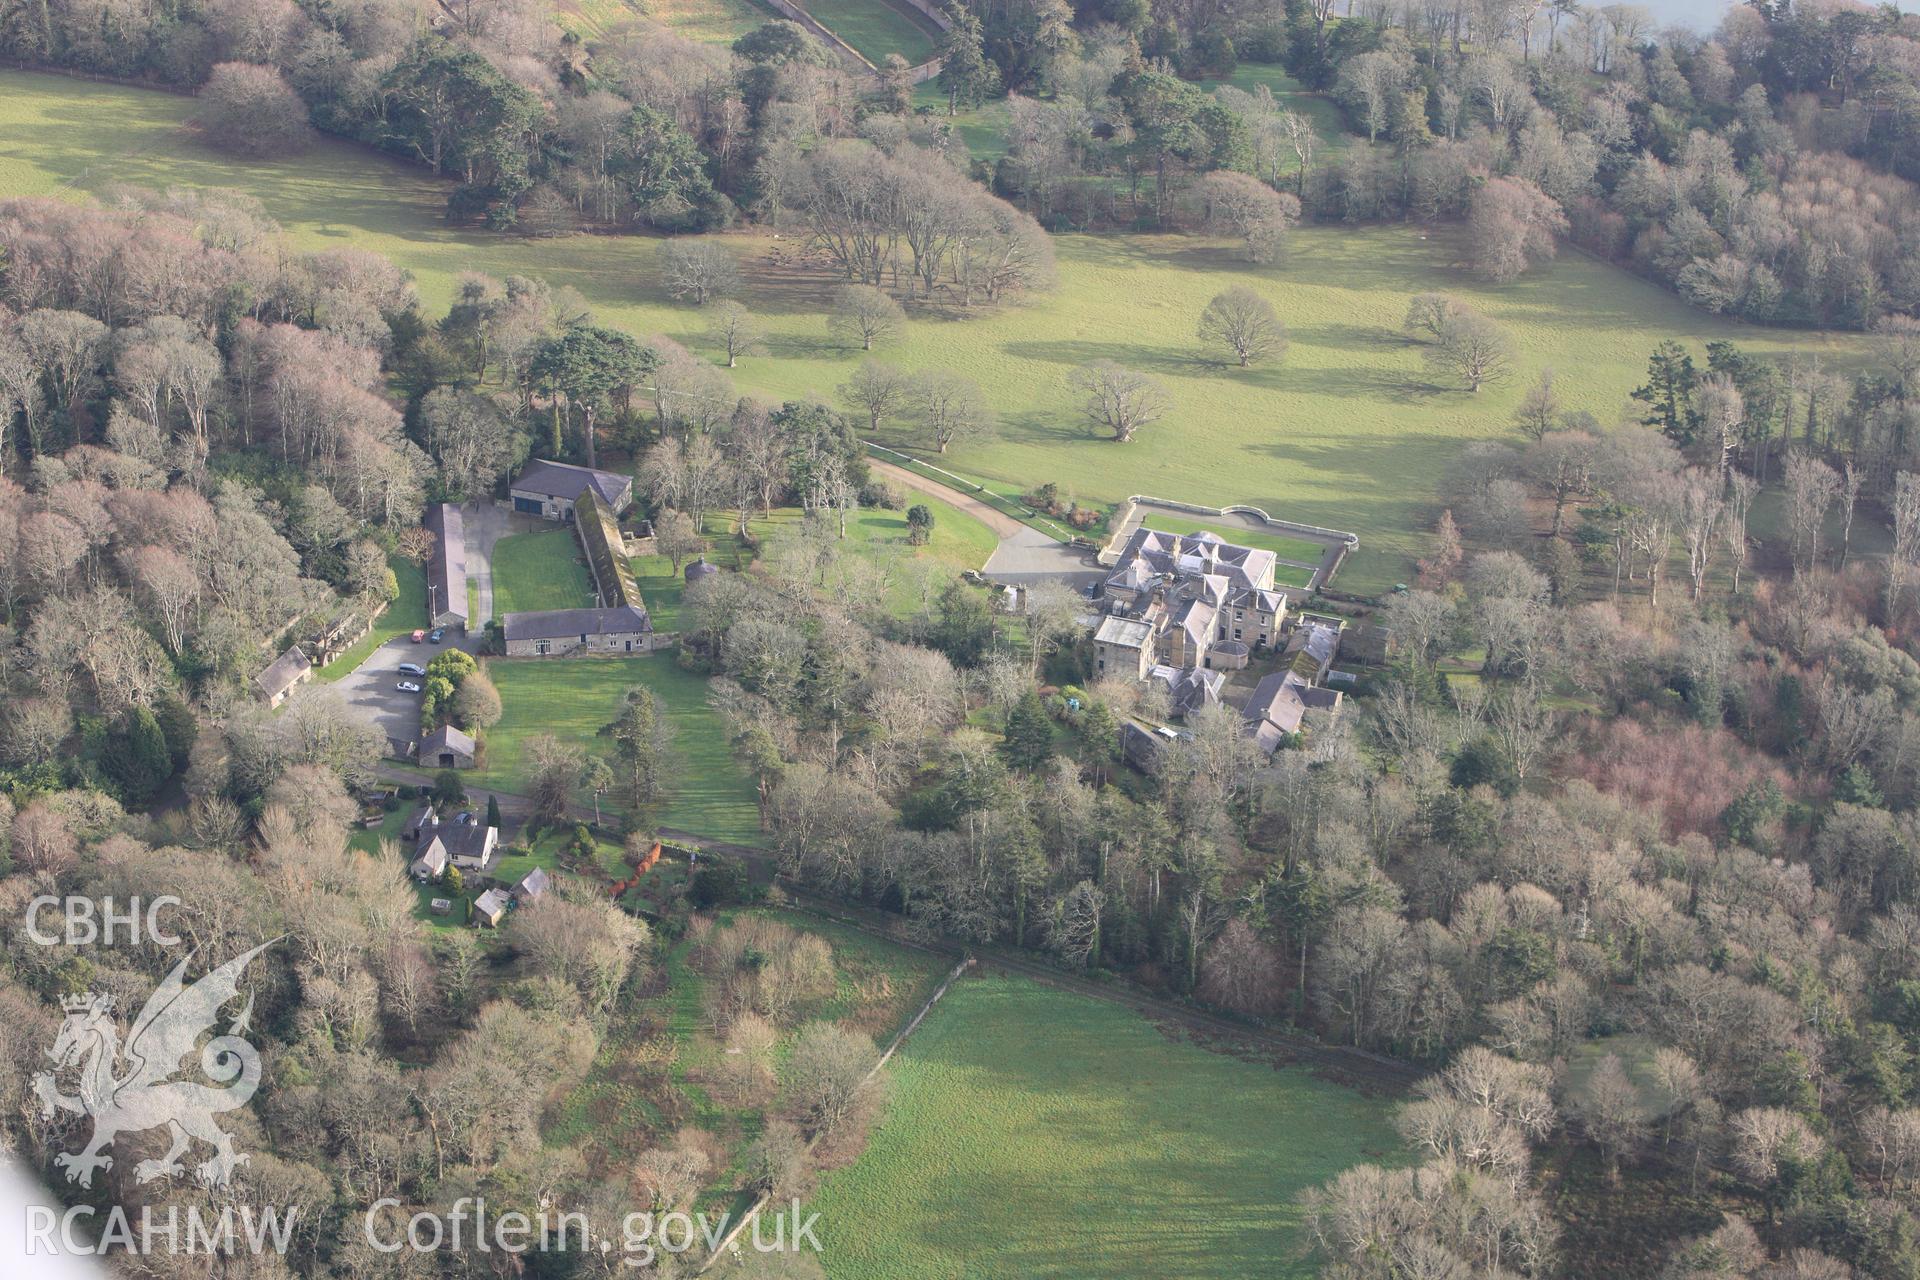 RCAHMW colour oblique photograph of Bodorgan Mansion and gardens. Taken by Toby Driver on 13/01/2012.